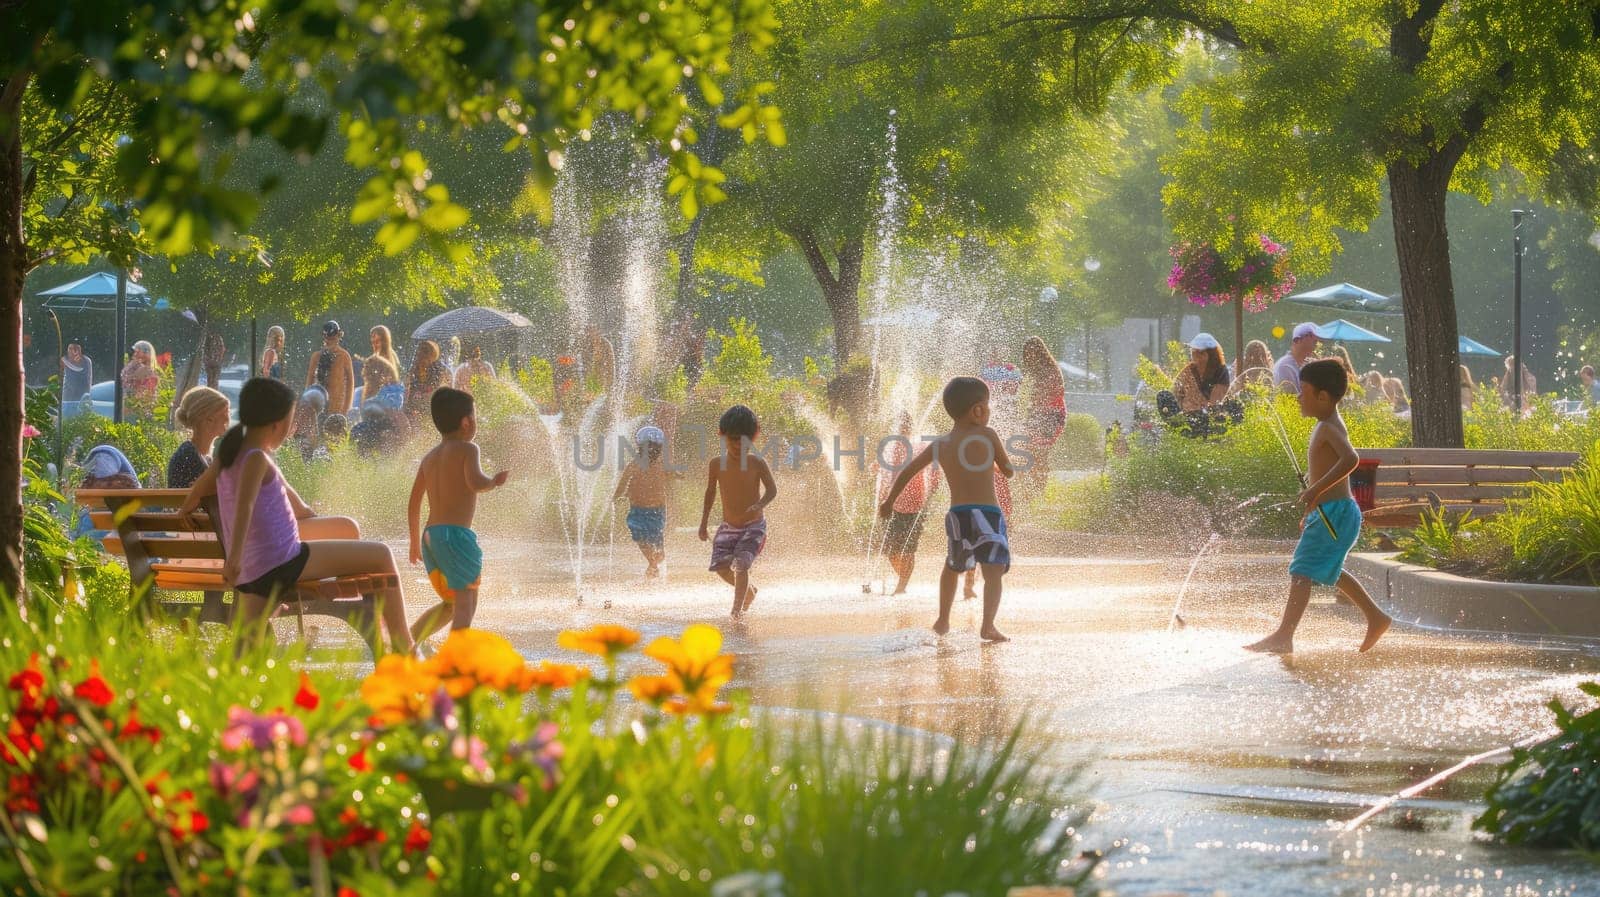 A group of children are playing in a fountain in a park AIG41 by biancoblue